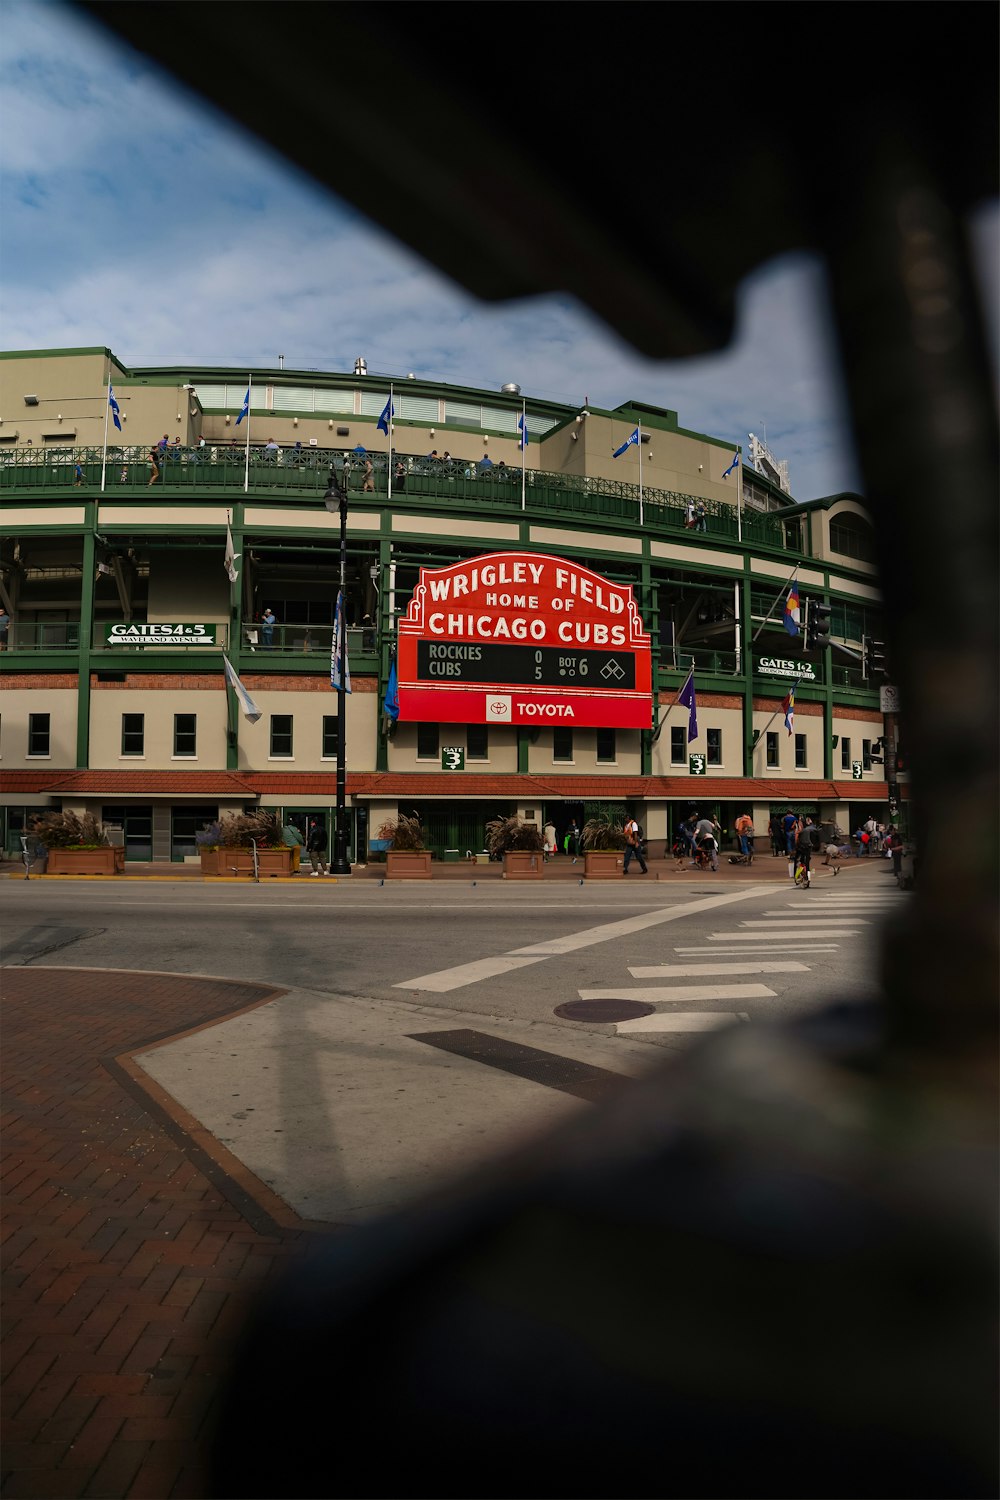 a view of wrigley field from across the street